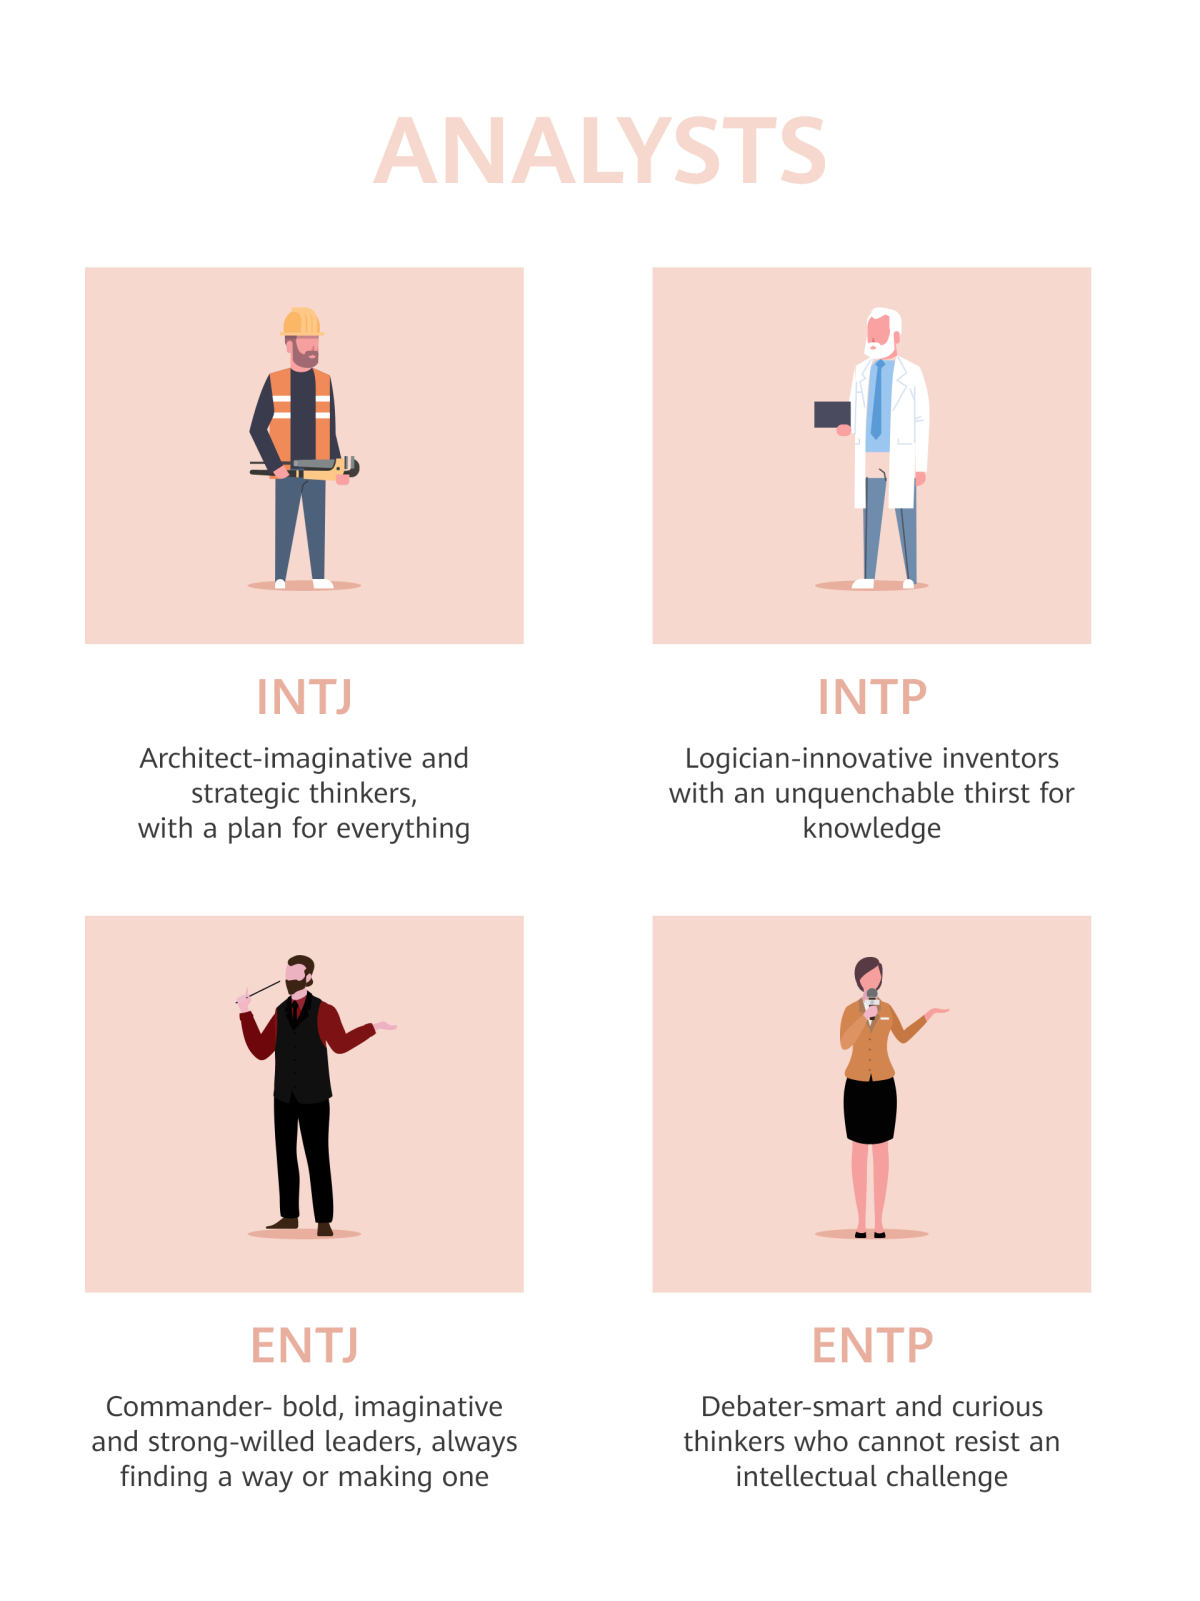 Pink MBTI Personality Type: INTJ or INTP?